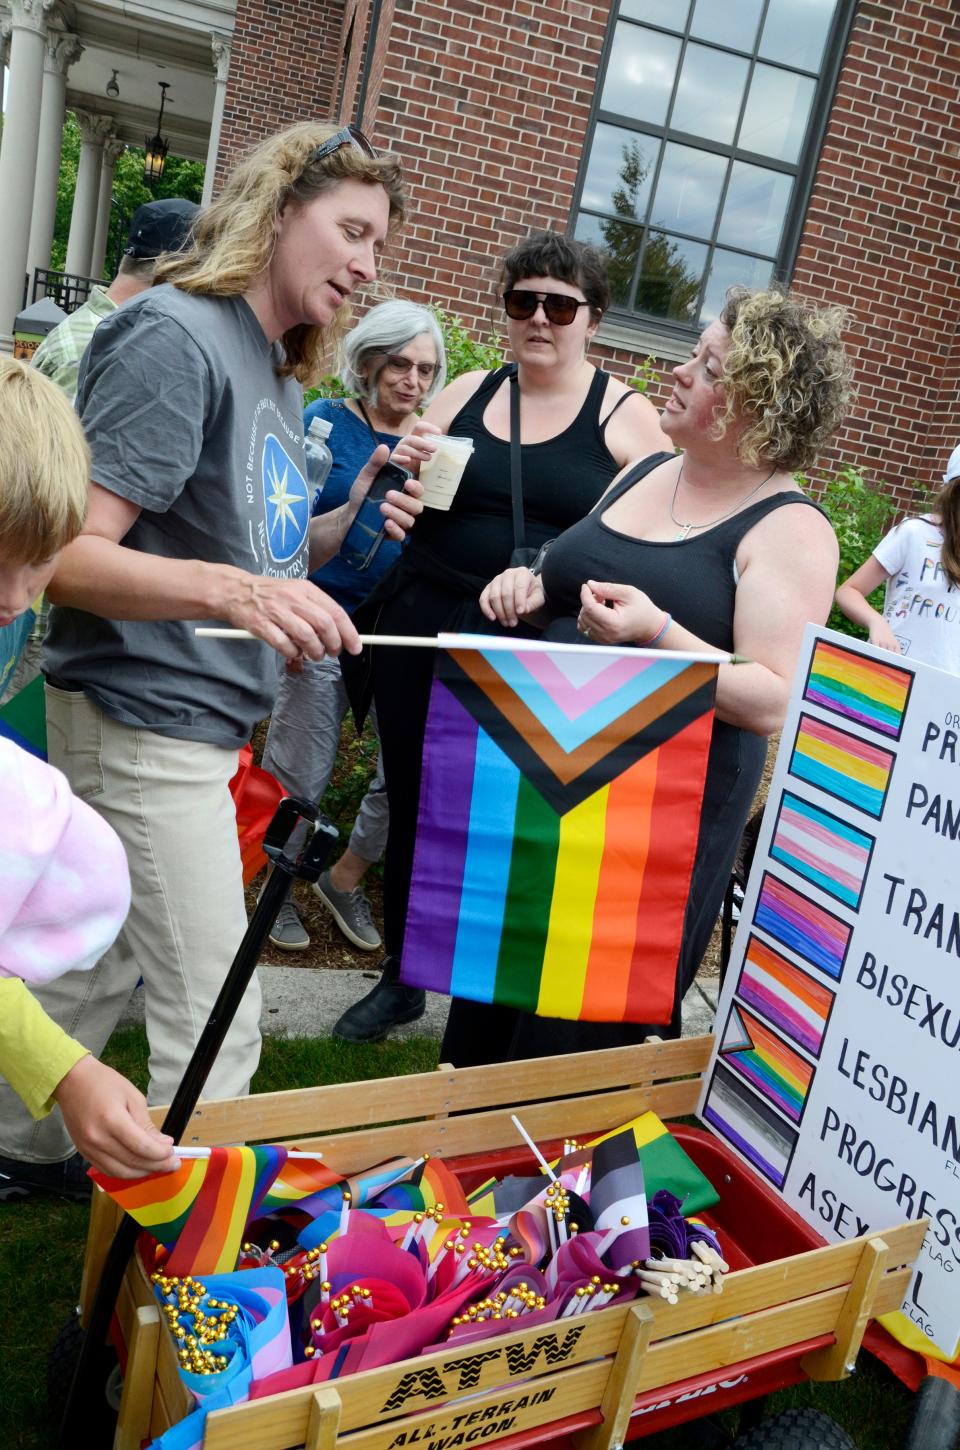 People pick out their free LGBTQ+ flags on June 28, 2022 prior to the annual Pride Month march, which started at the Petoskey District Library and continued to the green space in front of 200 E. Lake St. for a peaceful demonstration. The march coincided with the library’s kickoff event for its most recent Community Read series, which focused on Malinda Lo's "Last Night at the Telegraph Club.” Free copies of the book were available prior to the march.